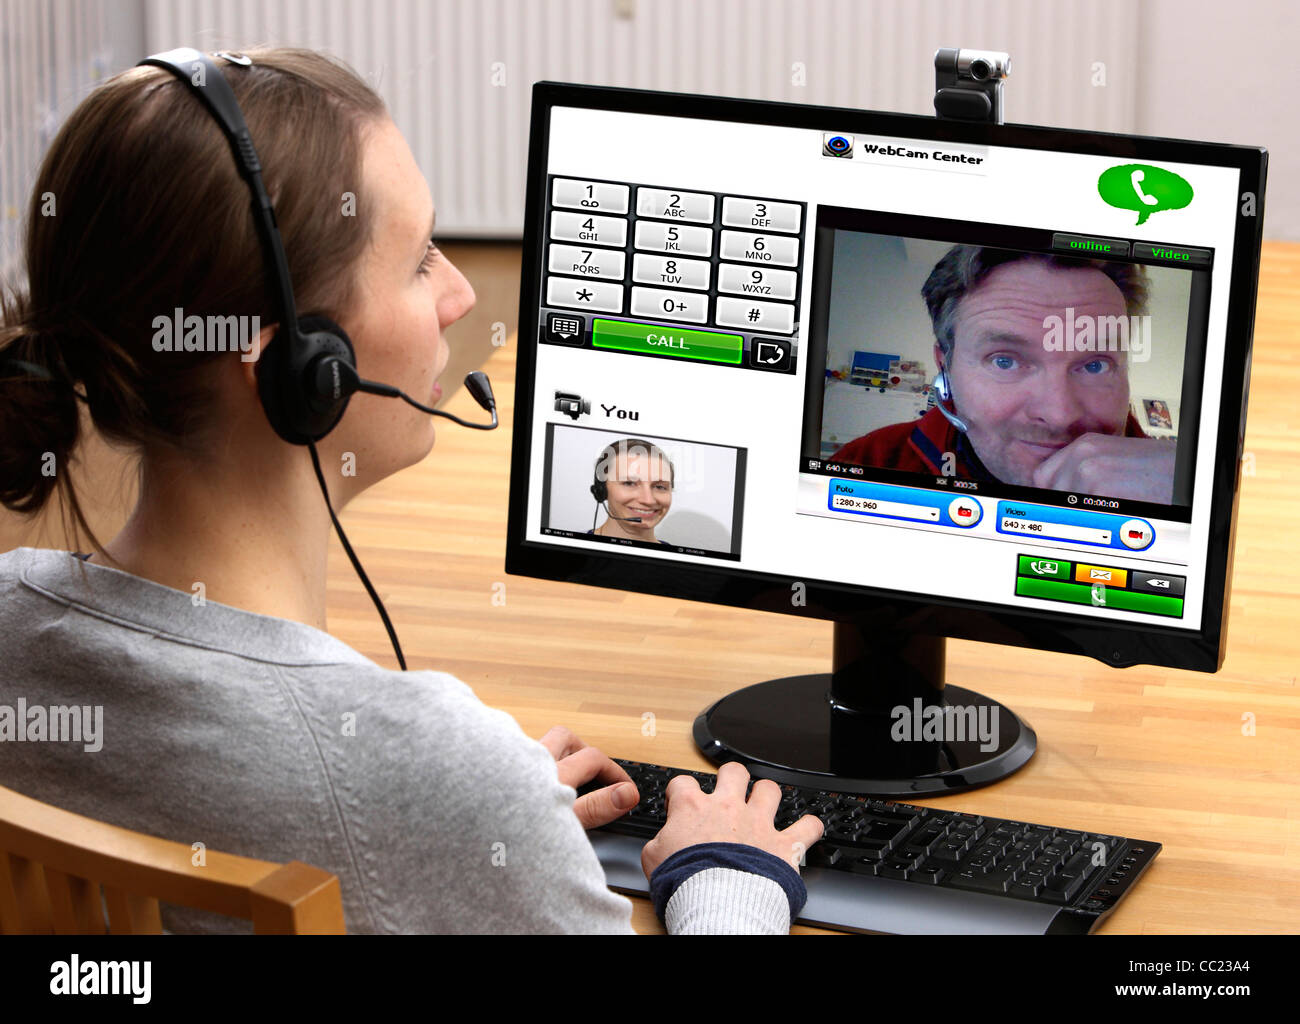 Online live chat video Live Video